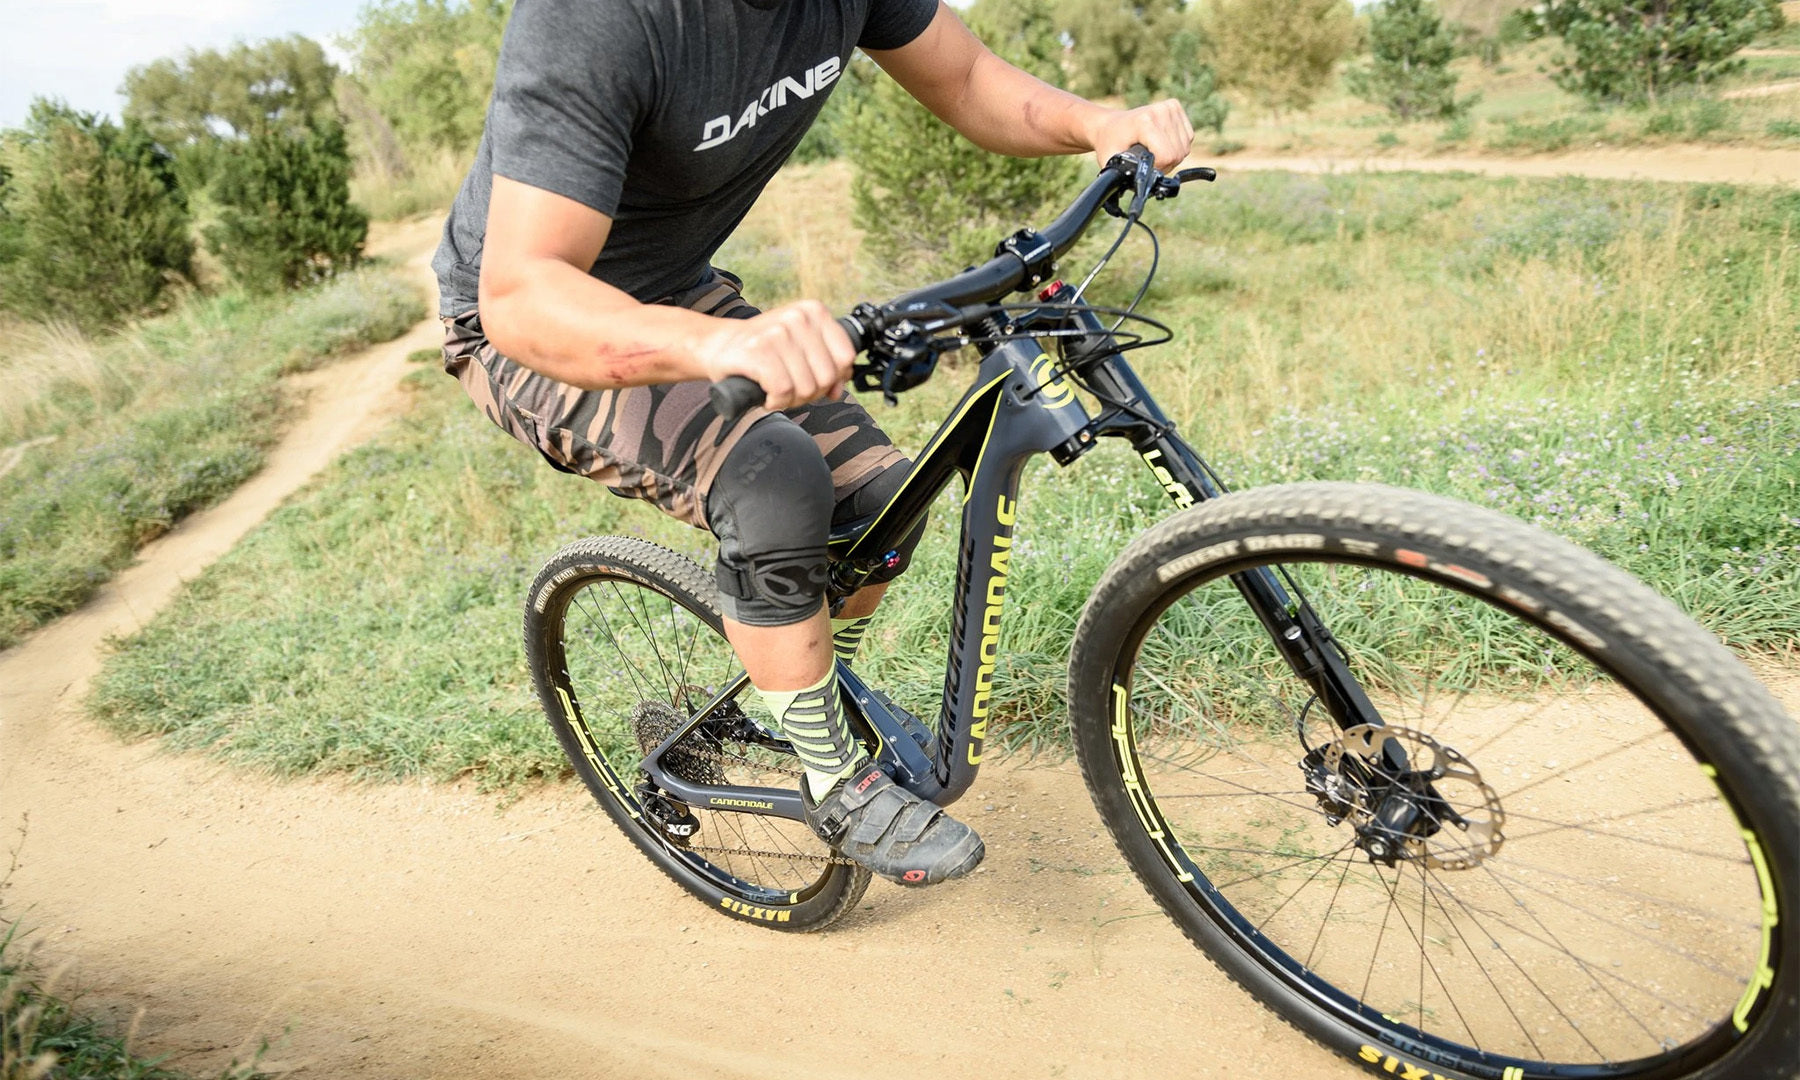 Cannondale Lefty Fork Review: Should You Buy It? Pros & Cons | The